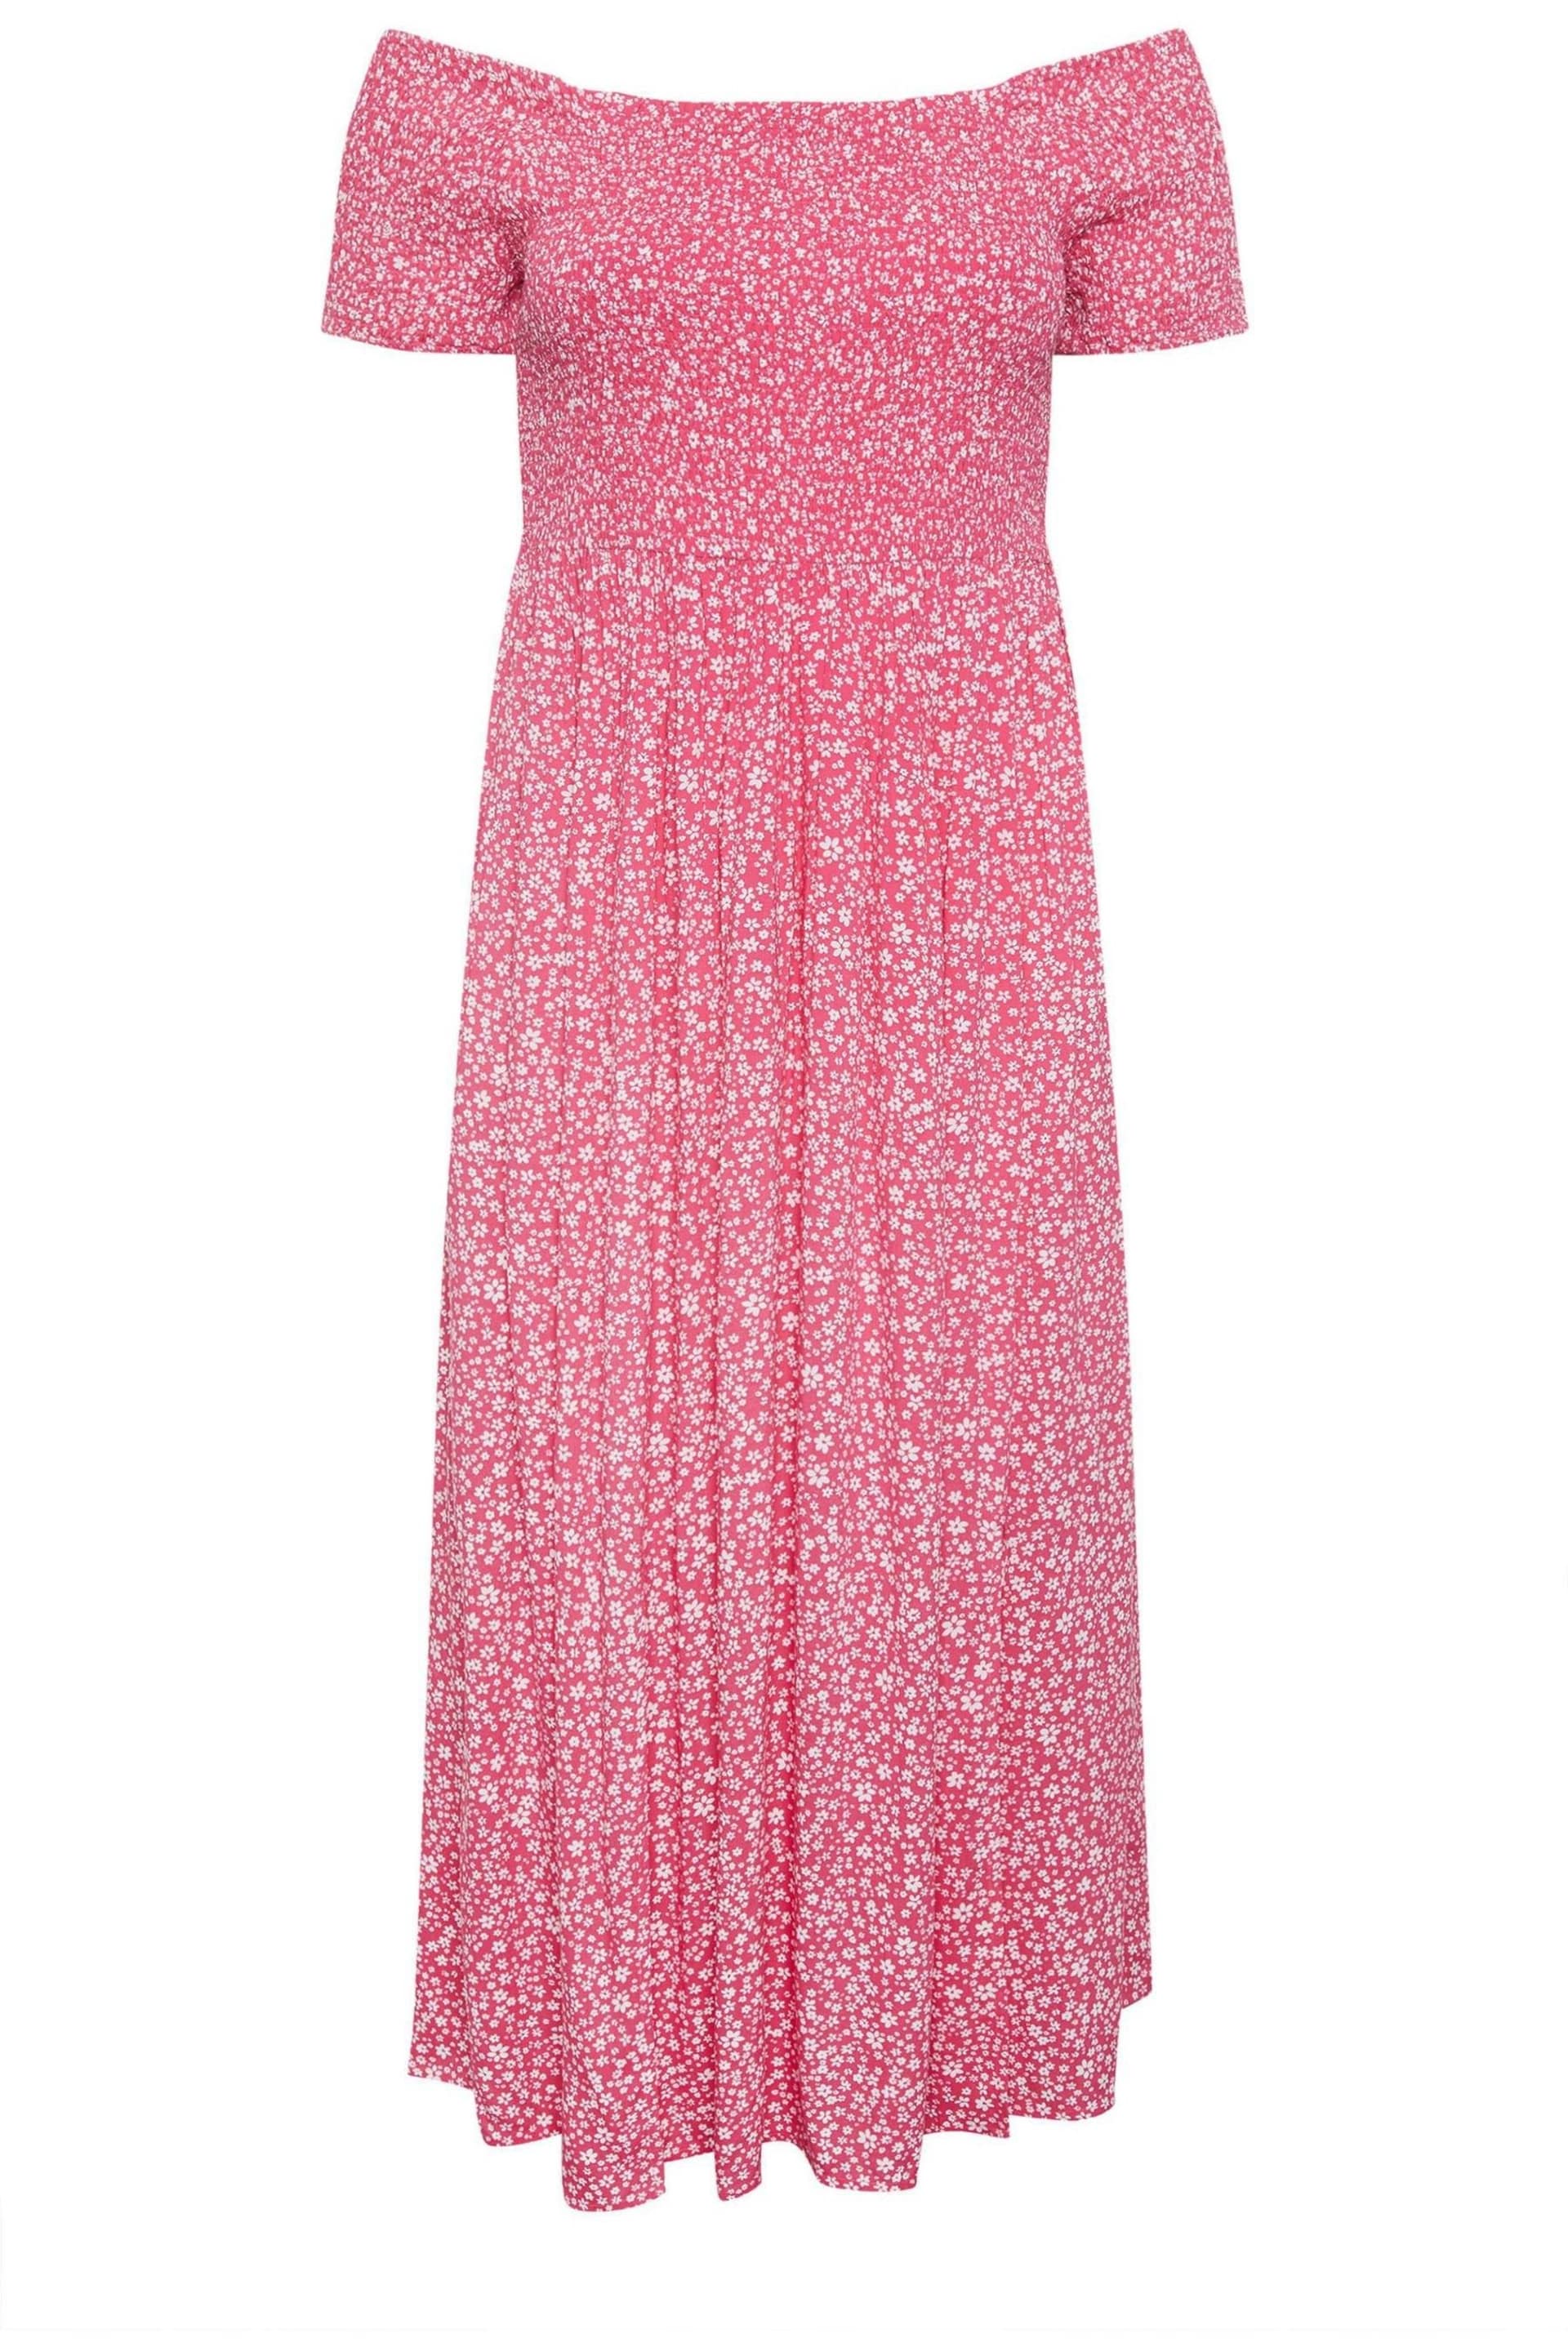 Yours Curve Pink Ditsy Floral Print Shirred Bardot Maxi Dress - Image 5 of 5